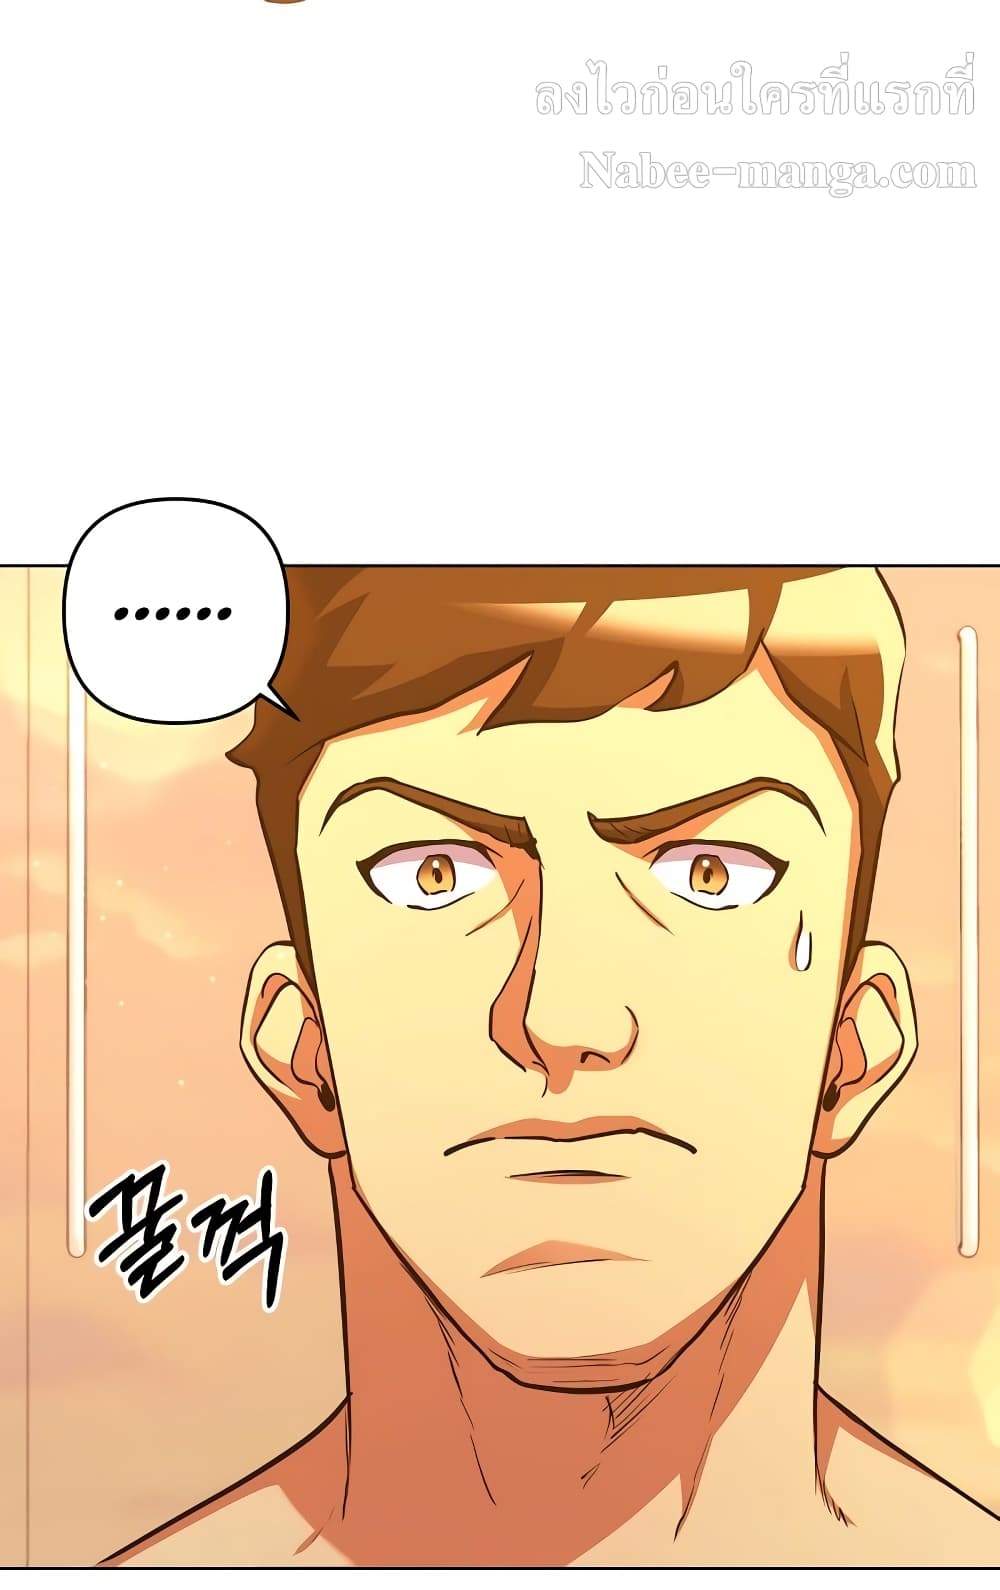 Surviving in an Action Manhwa 6 022